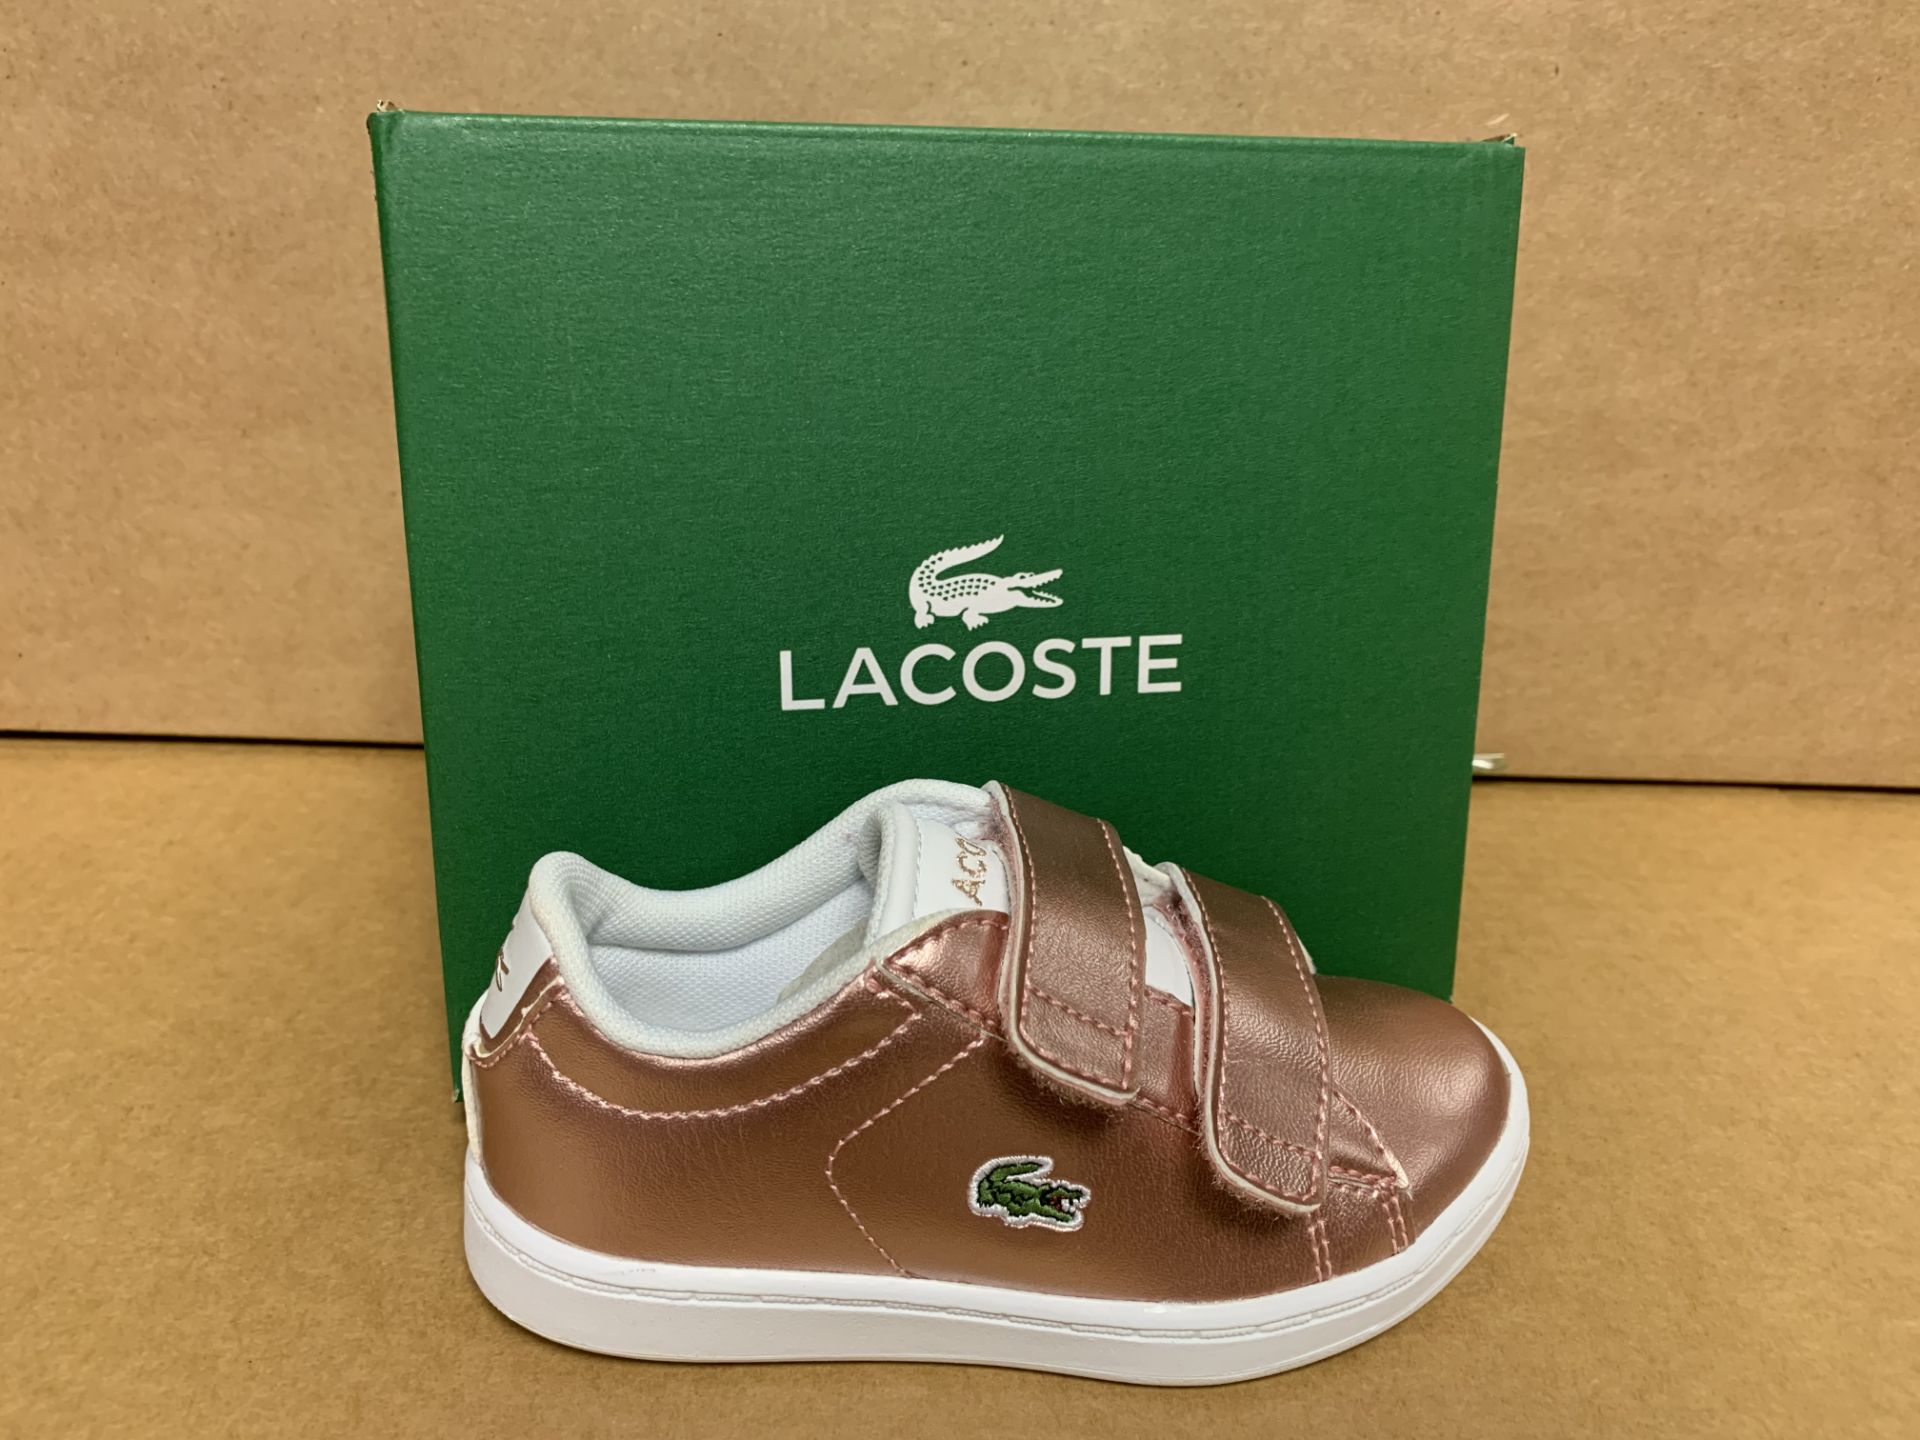 (NO VAT) 6 X BRAND NEW LACOSTE ROSE GOLD TRAINERS SIZE i7